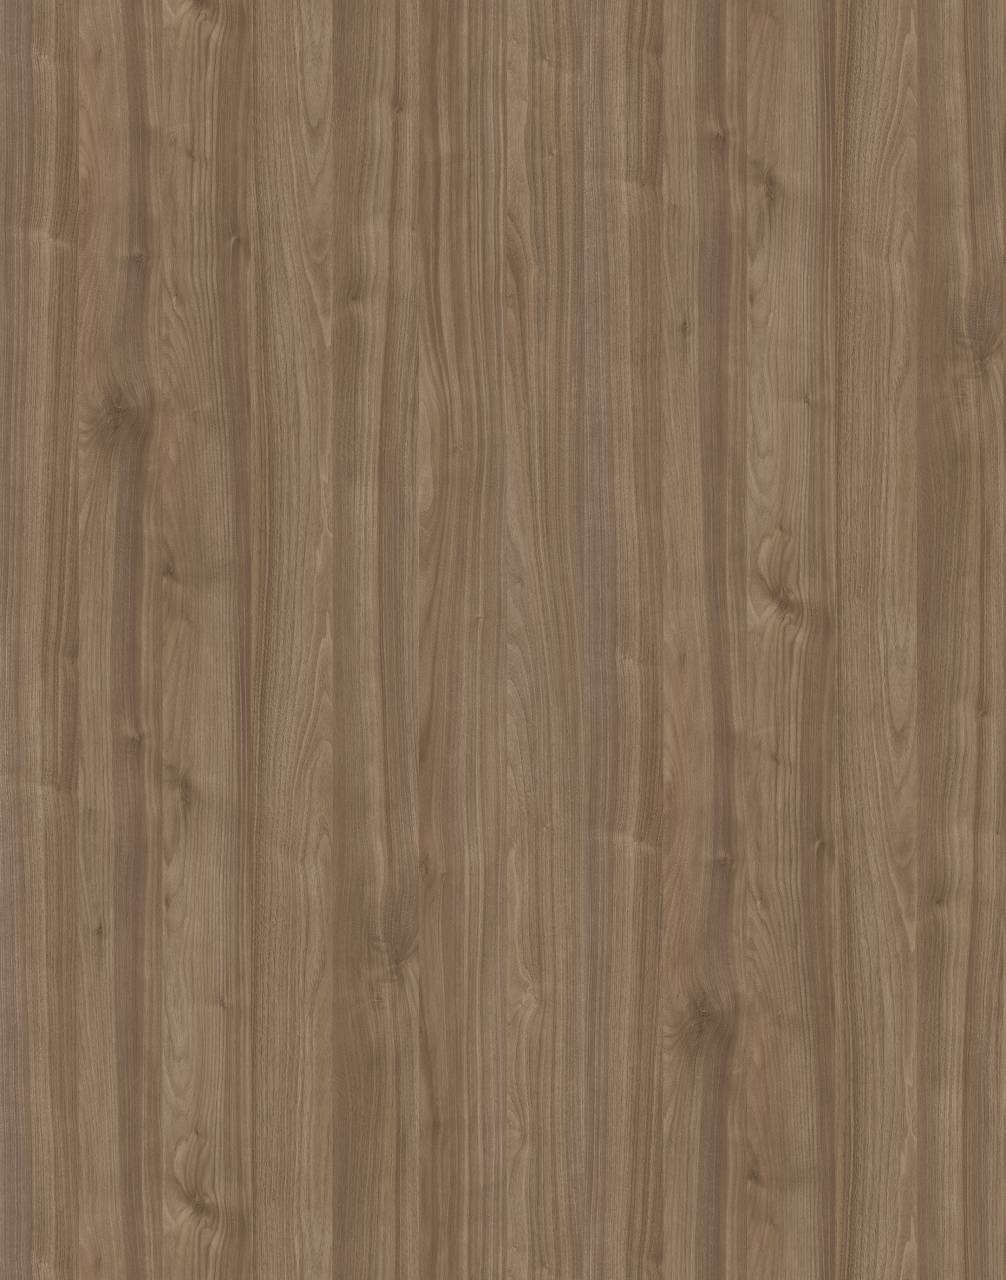 Dark Select Walnut PW HPL with smooth surface and deep brown tones for a rich and luxurious look.